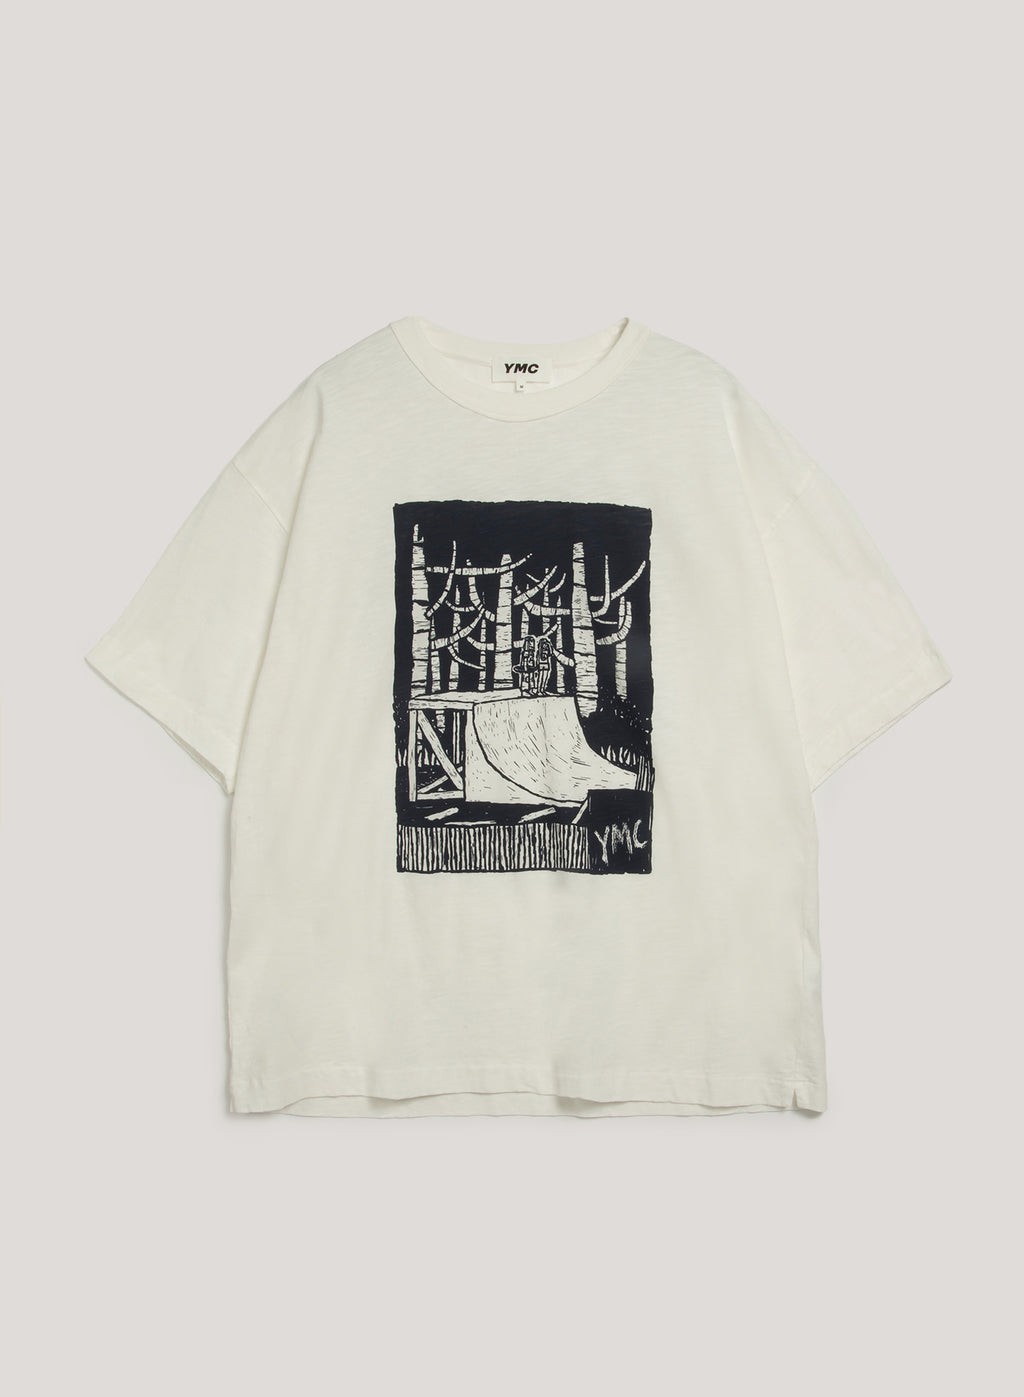 YMC It’s Out There Tee White